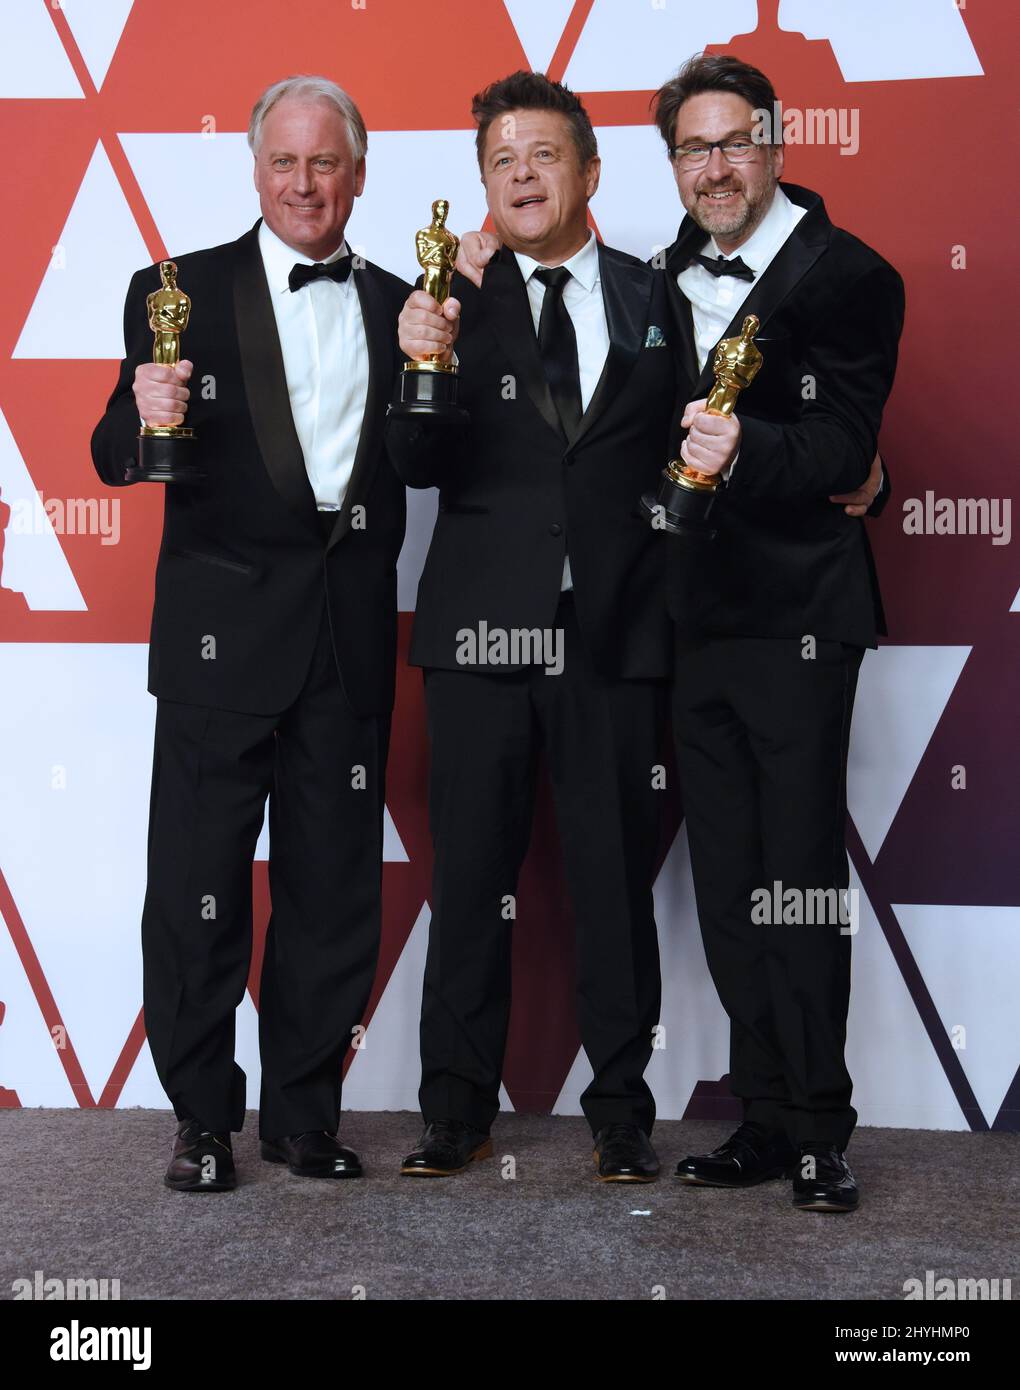 Paul Massey, Tim Cavagin and John Casali at the '91st Annual Academy Awards' - Press Room held at the Dolby Theatre Stock Photo